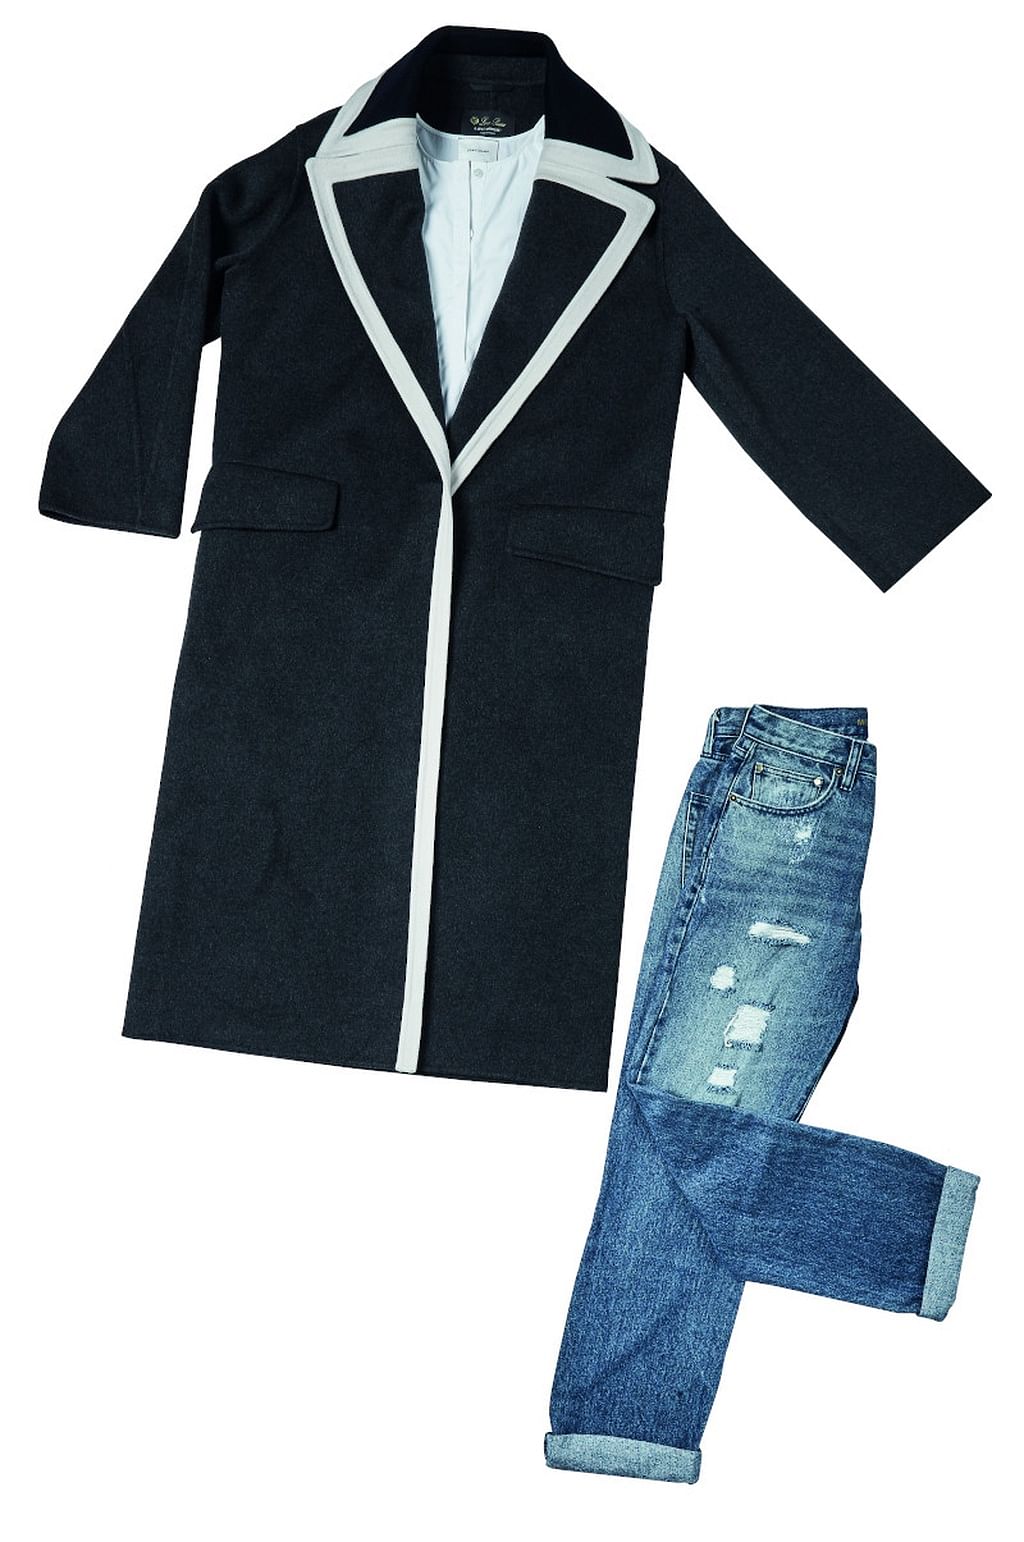 Poplin cotton top, from Longchamp. Cashmere wool coat, from Loro piana. Denim jeans, from Michael Kors.